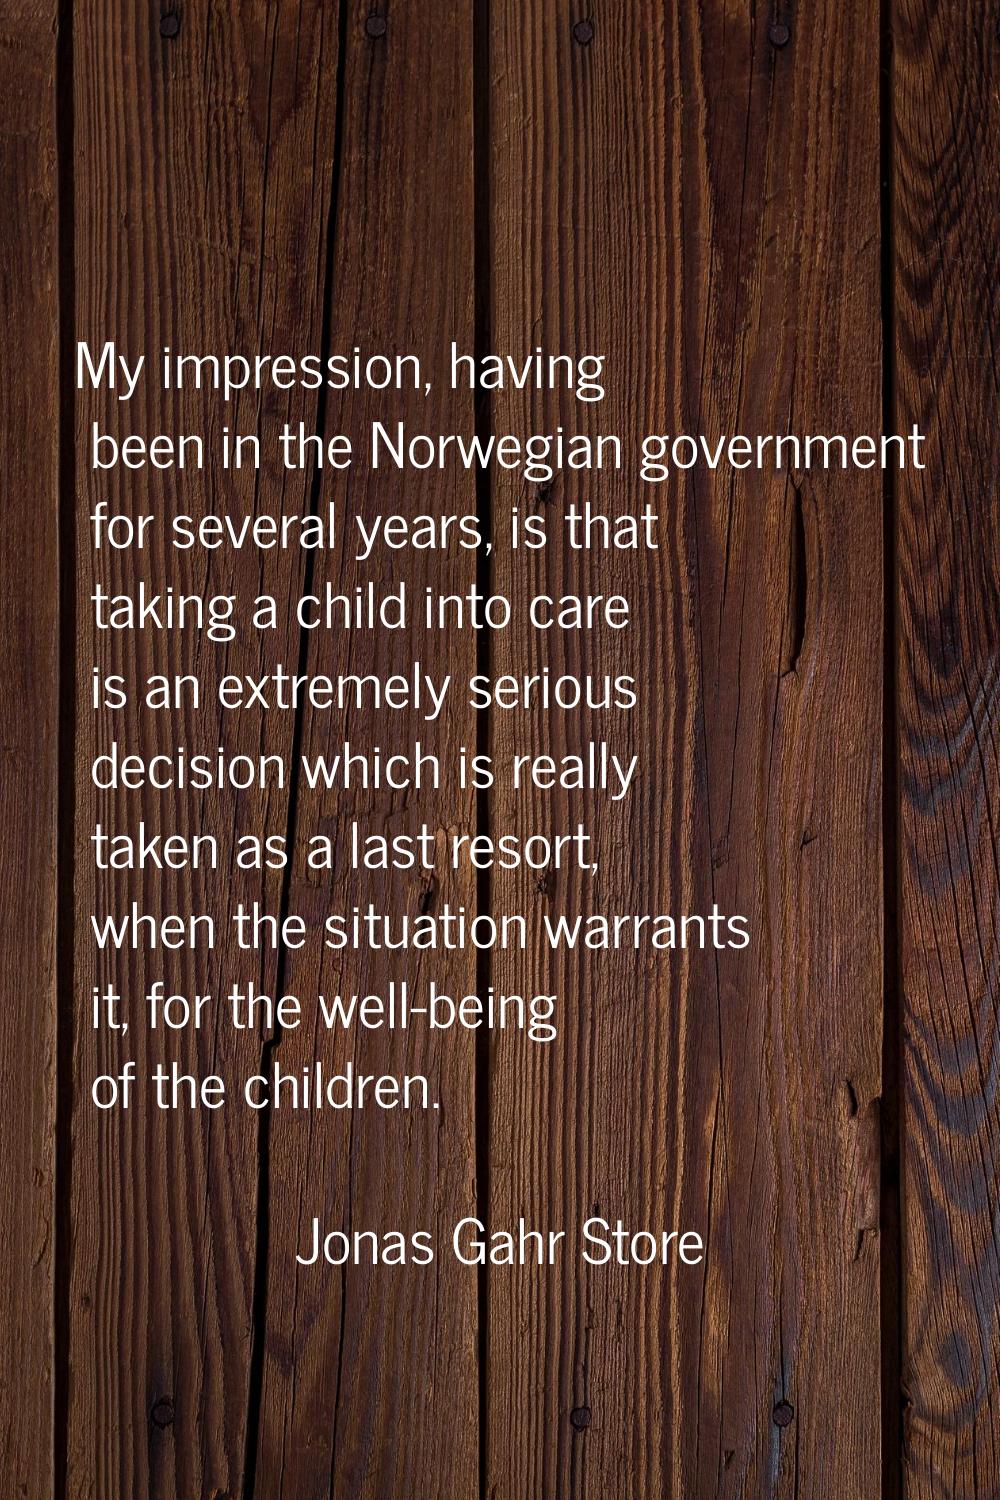 My impression, having been in the Norwegian government for several years, is that taking a child in